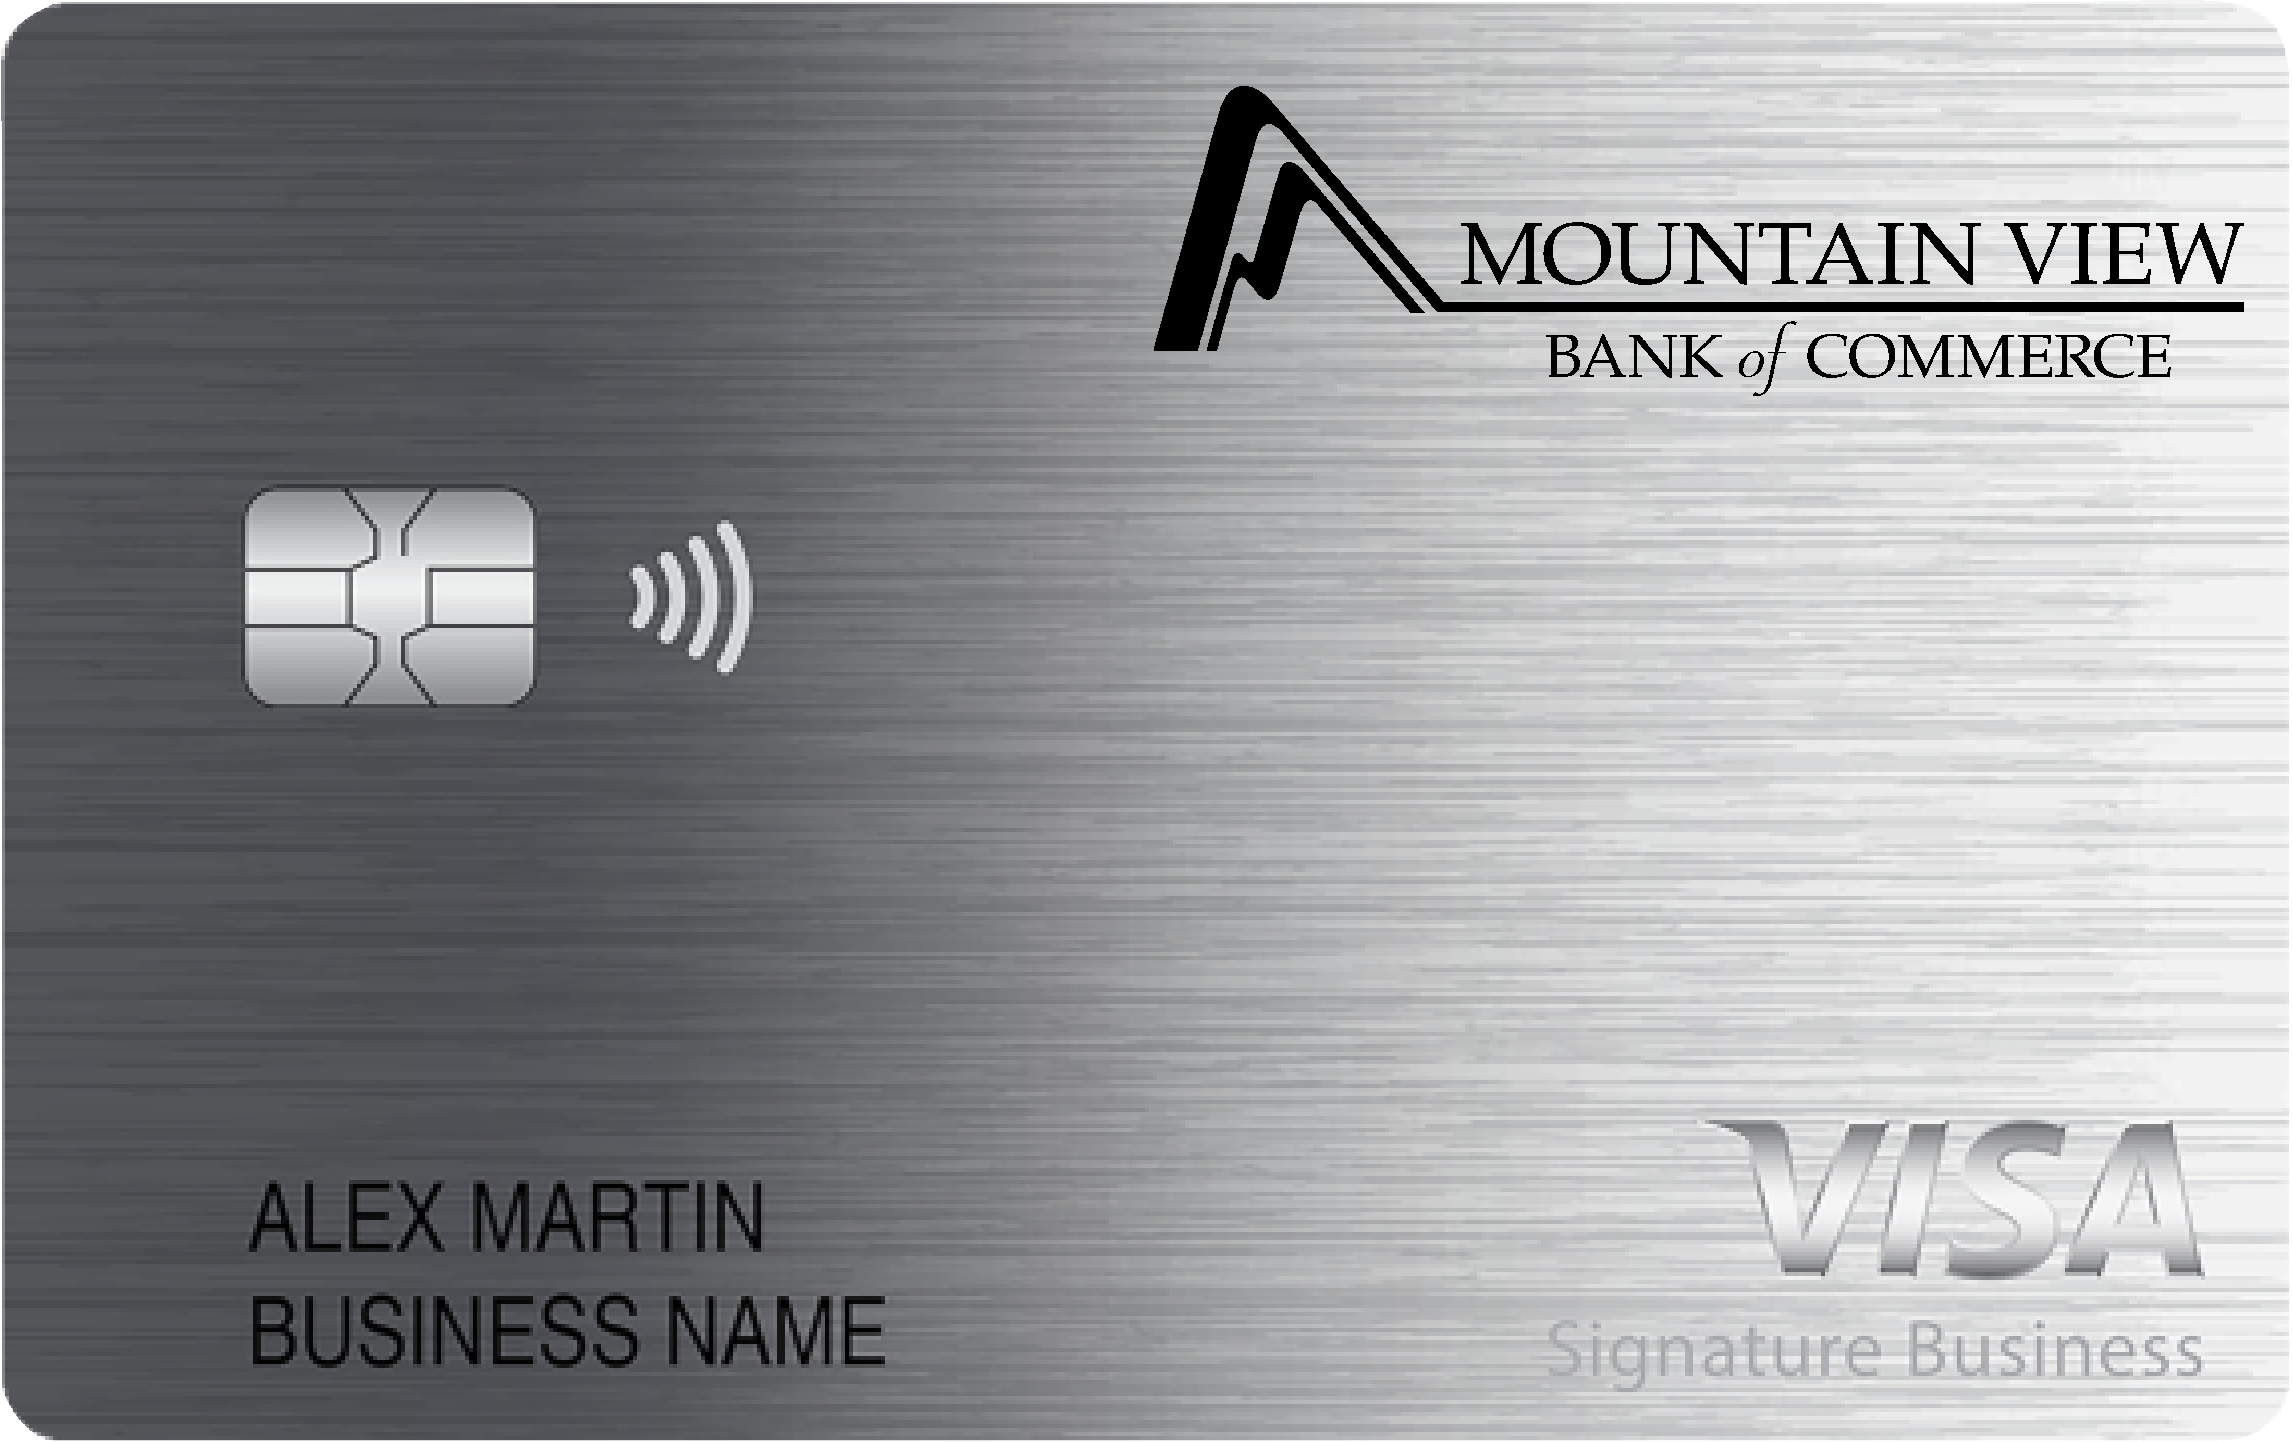 Mountain View Bank of Commerce Smart Business Rewards Card